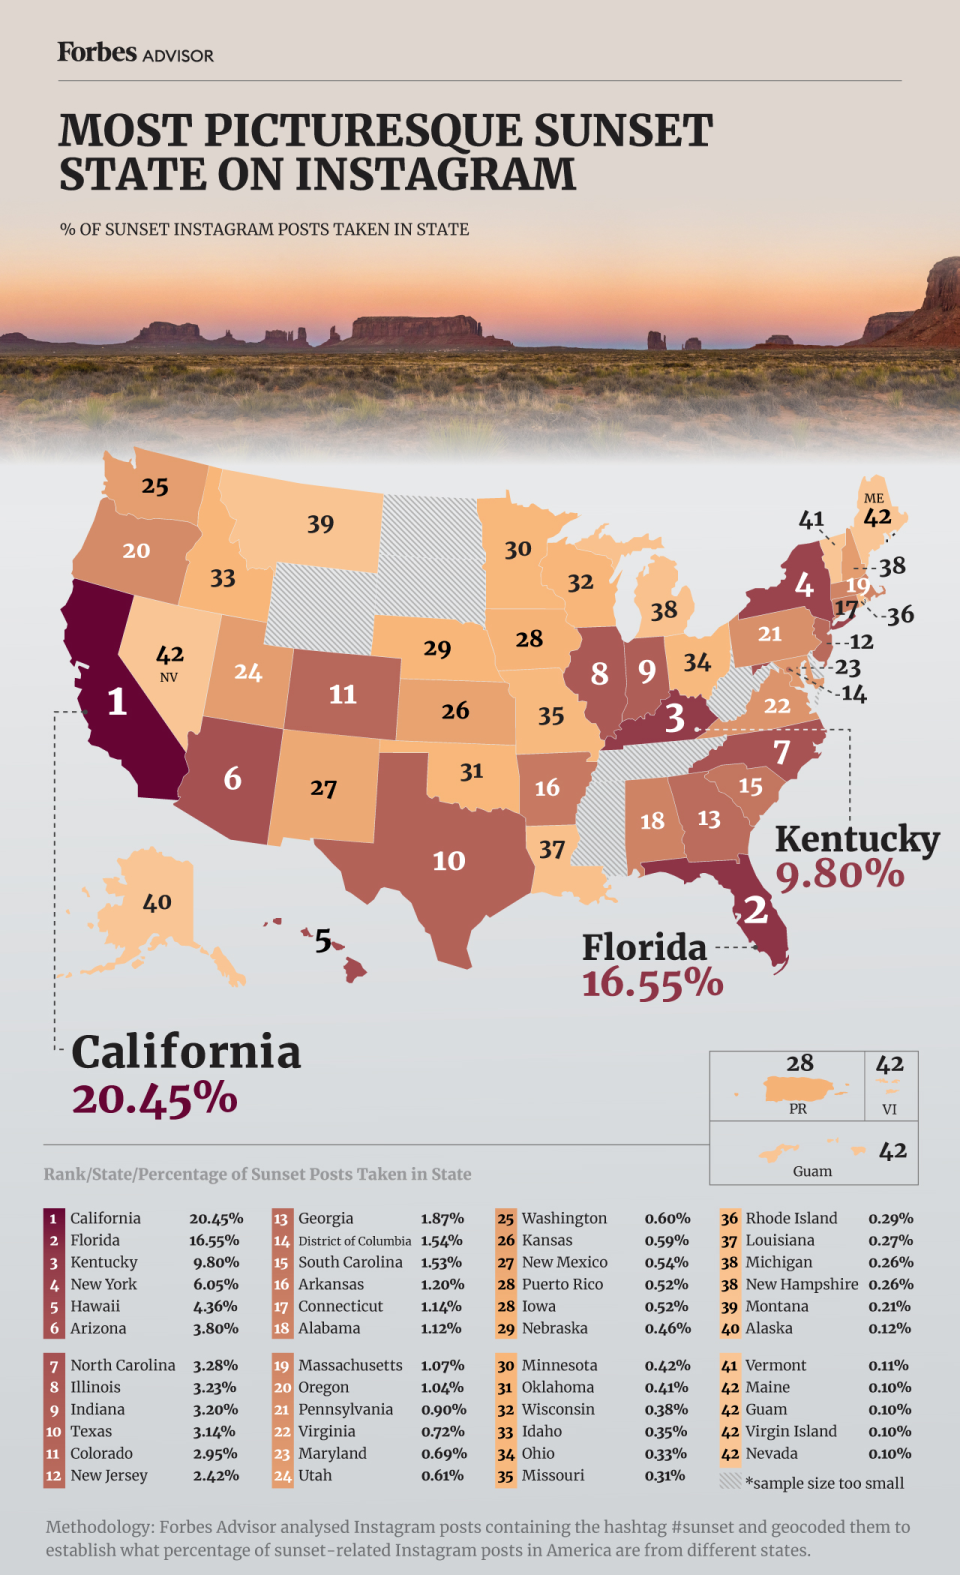 Forbes Advisor ranked the most picturesque sunset states based on data from Instagram.